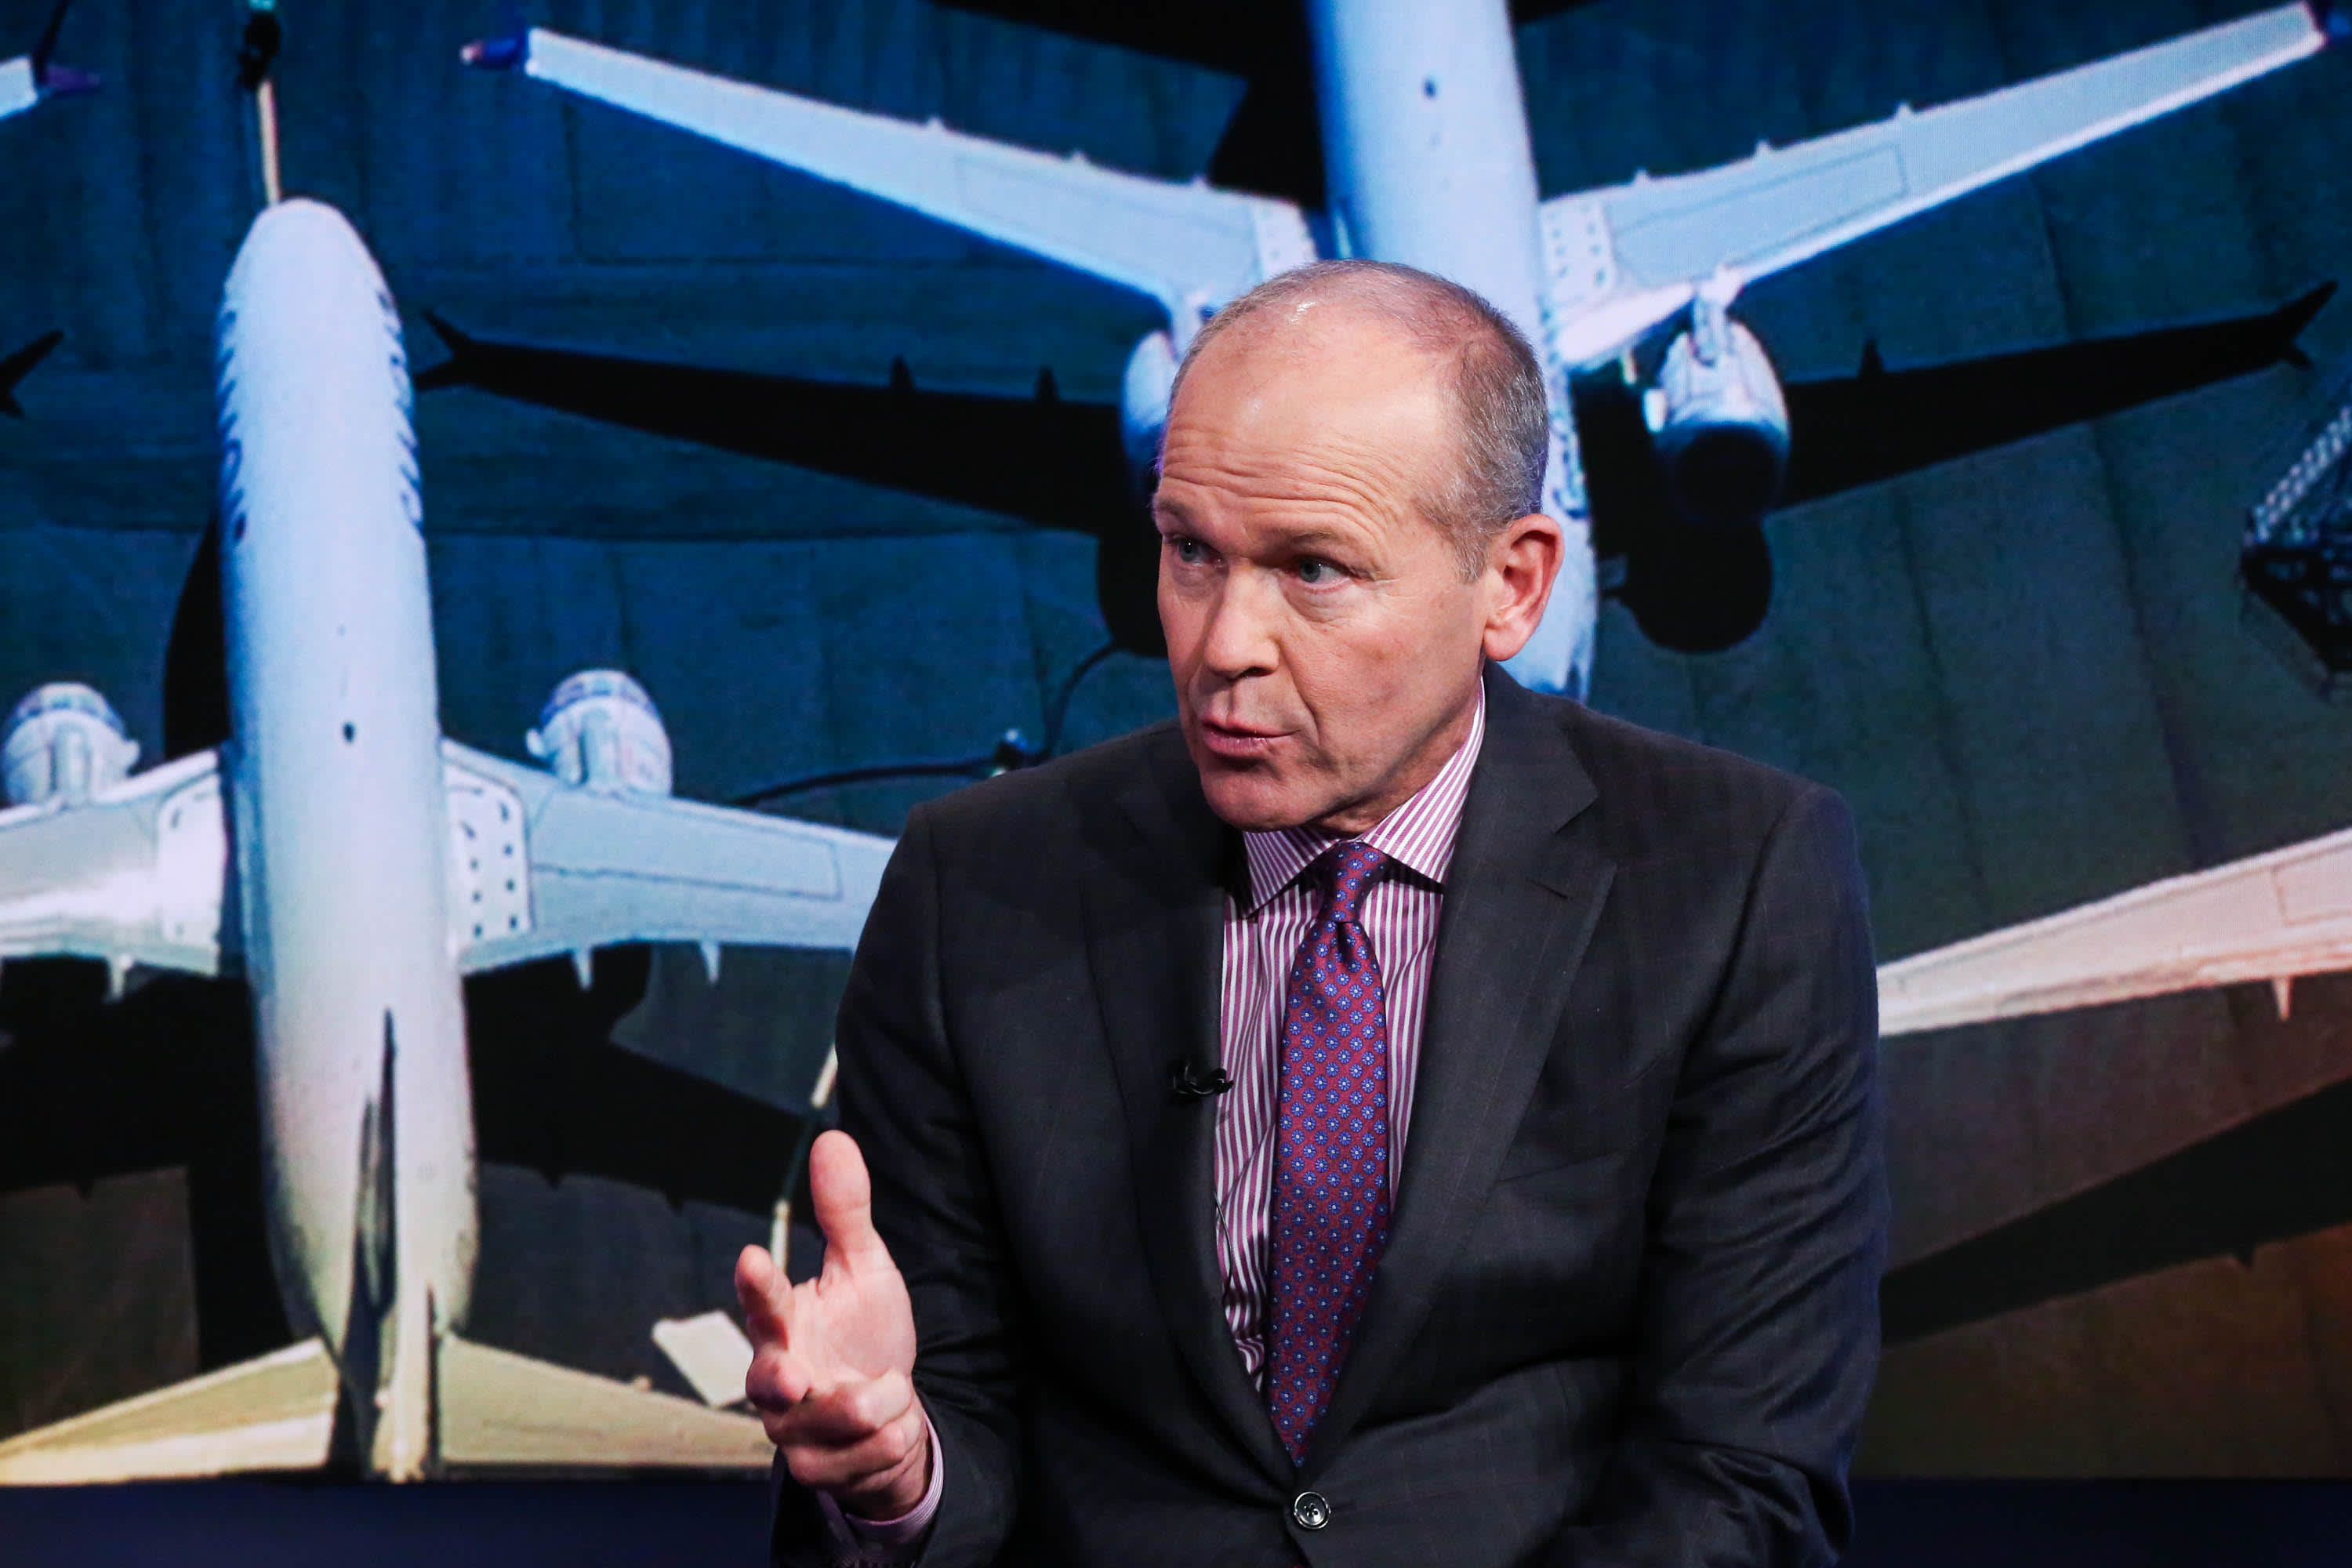 Boeing raises mandatory retirement age for CEO Calhoun by 5 years, and CFO will retire